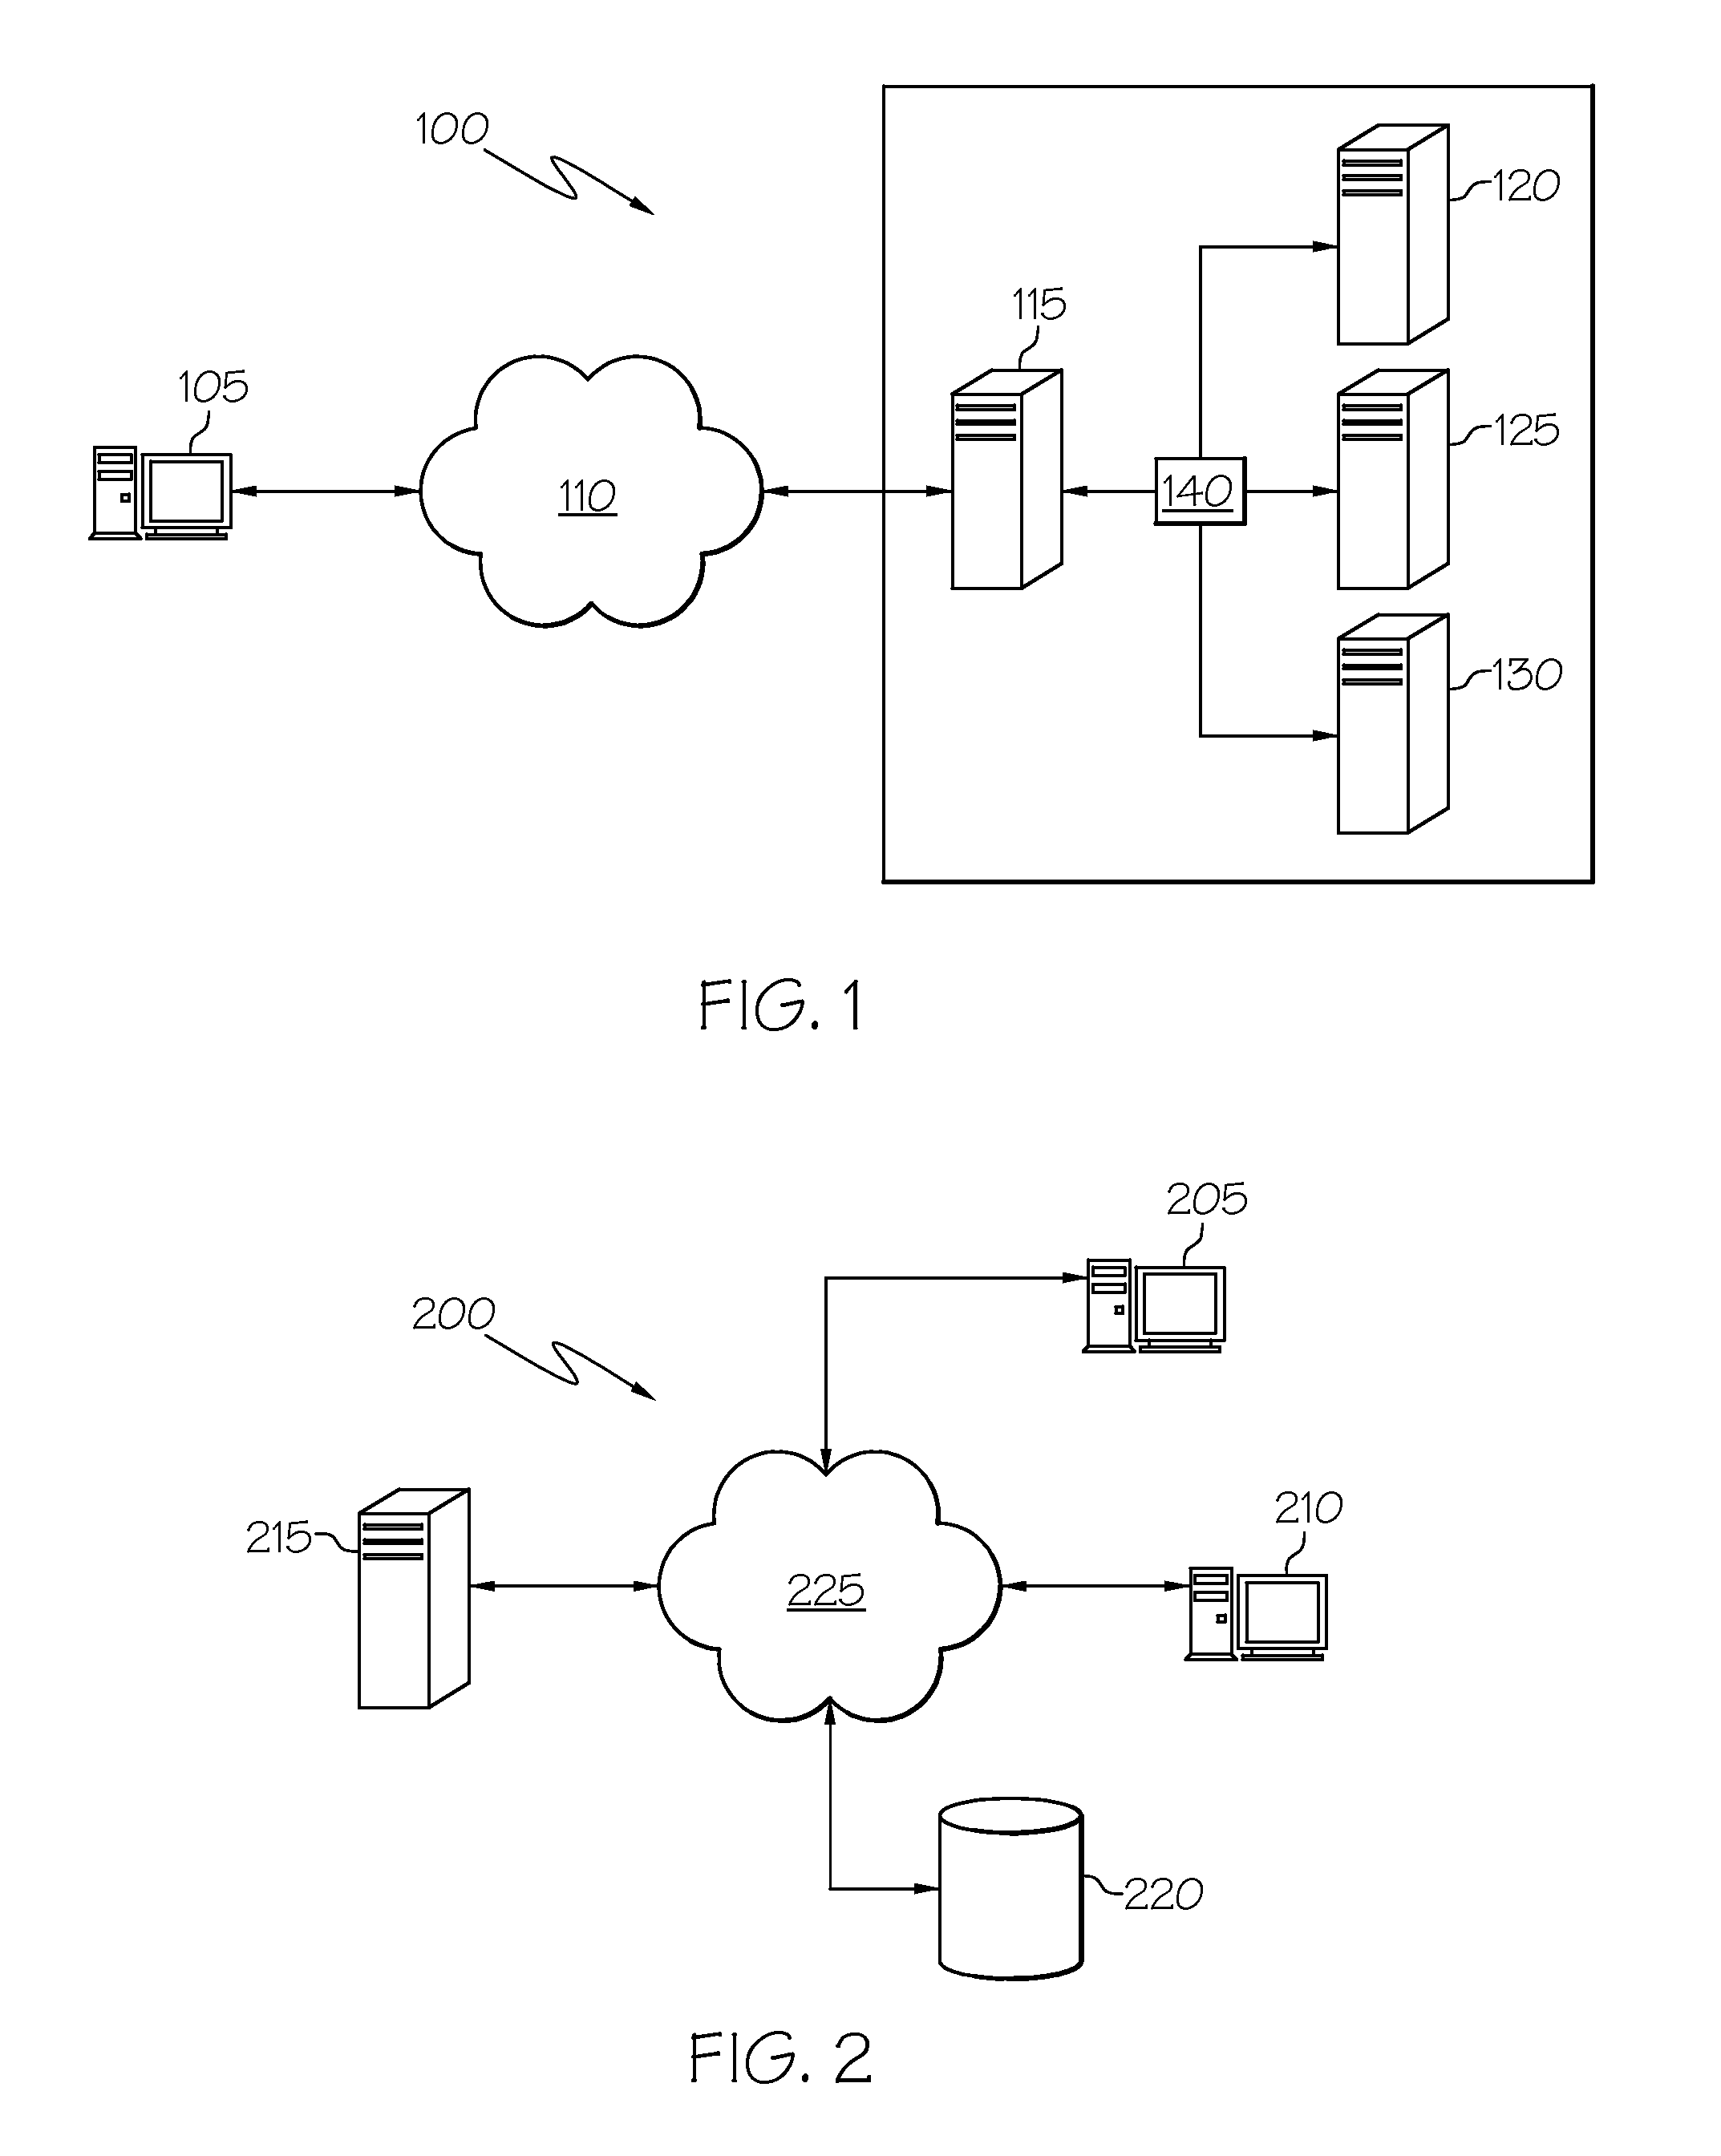 System and Method for Caching Client Requests to an Application Server Based on the Application Server's Reliability